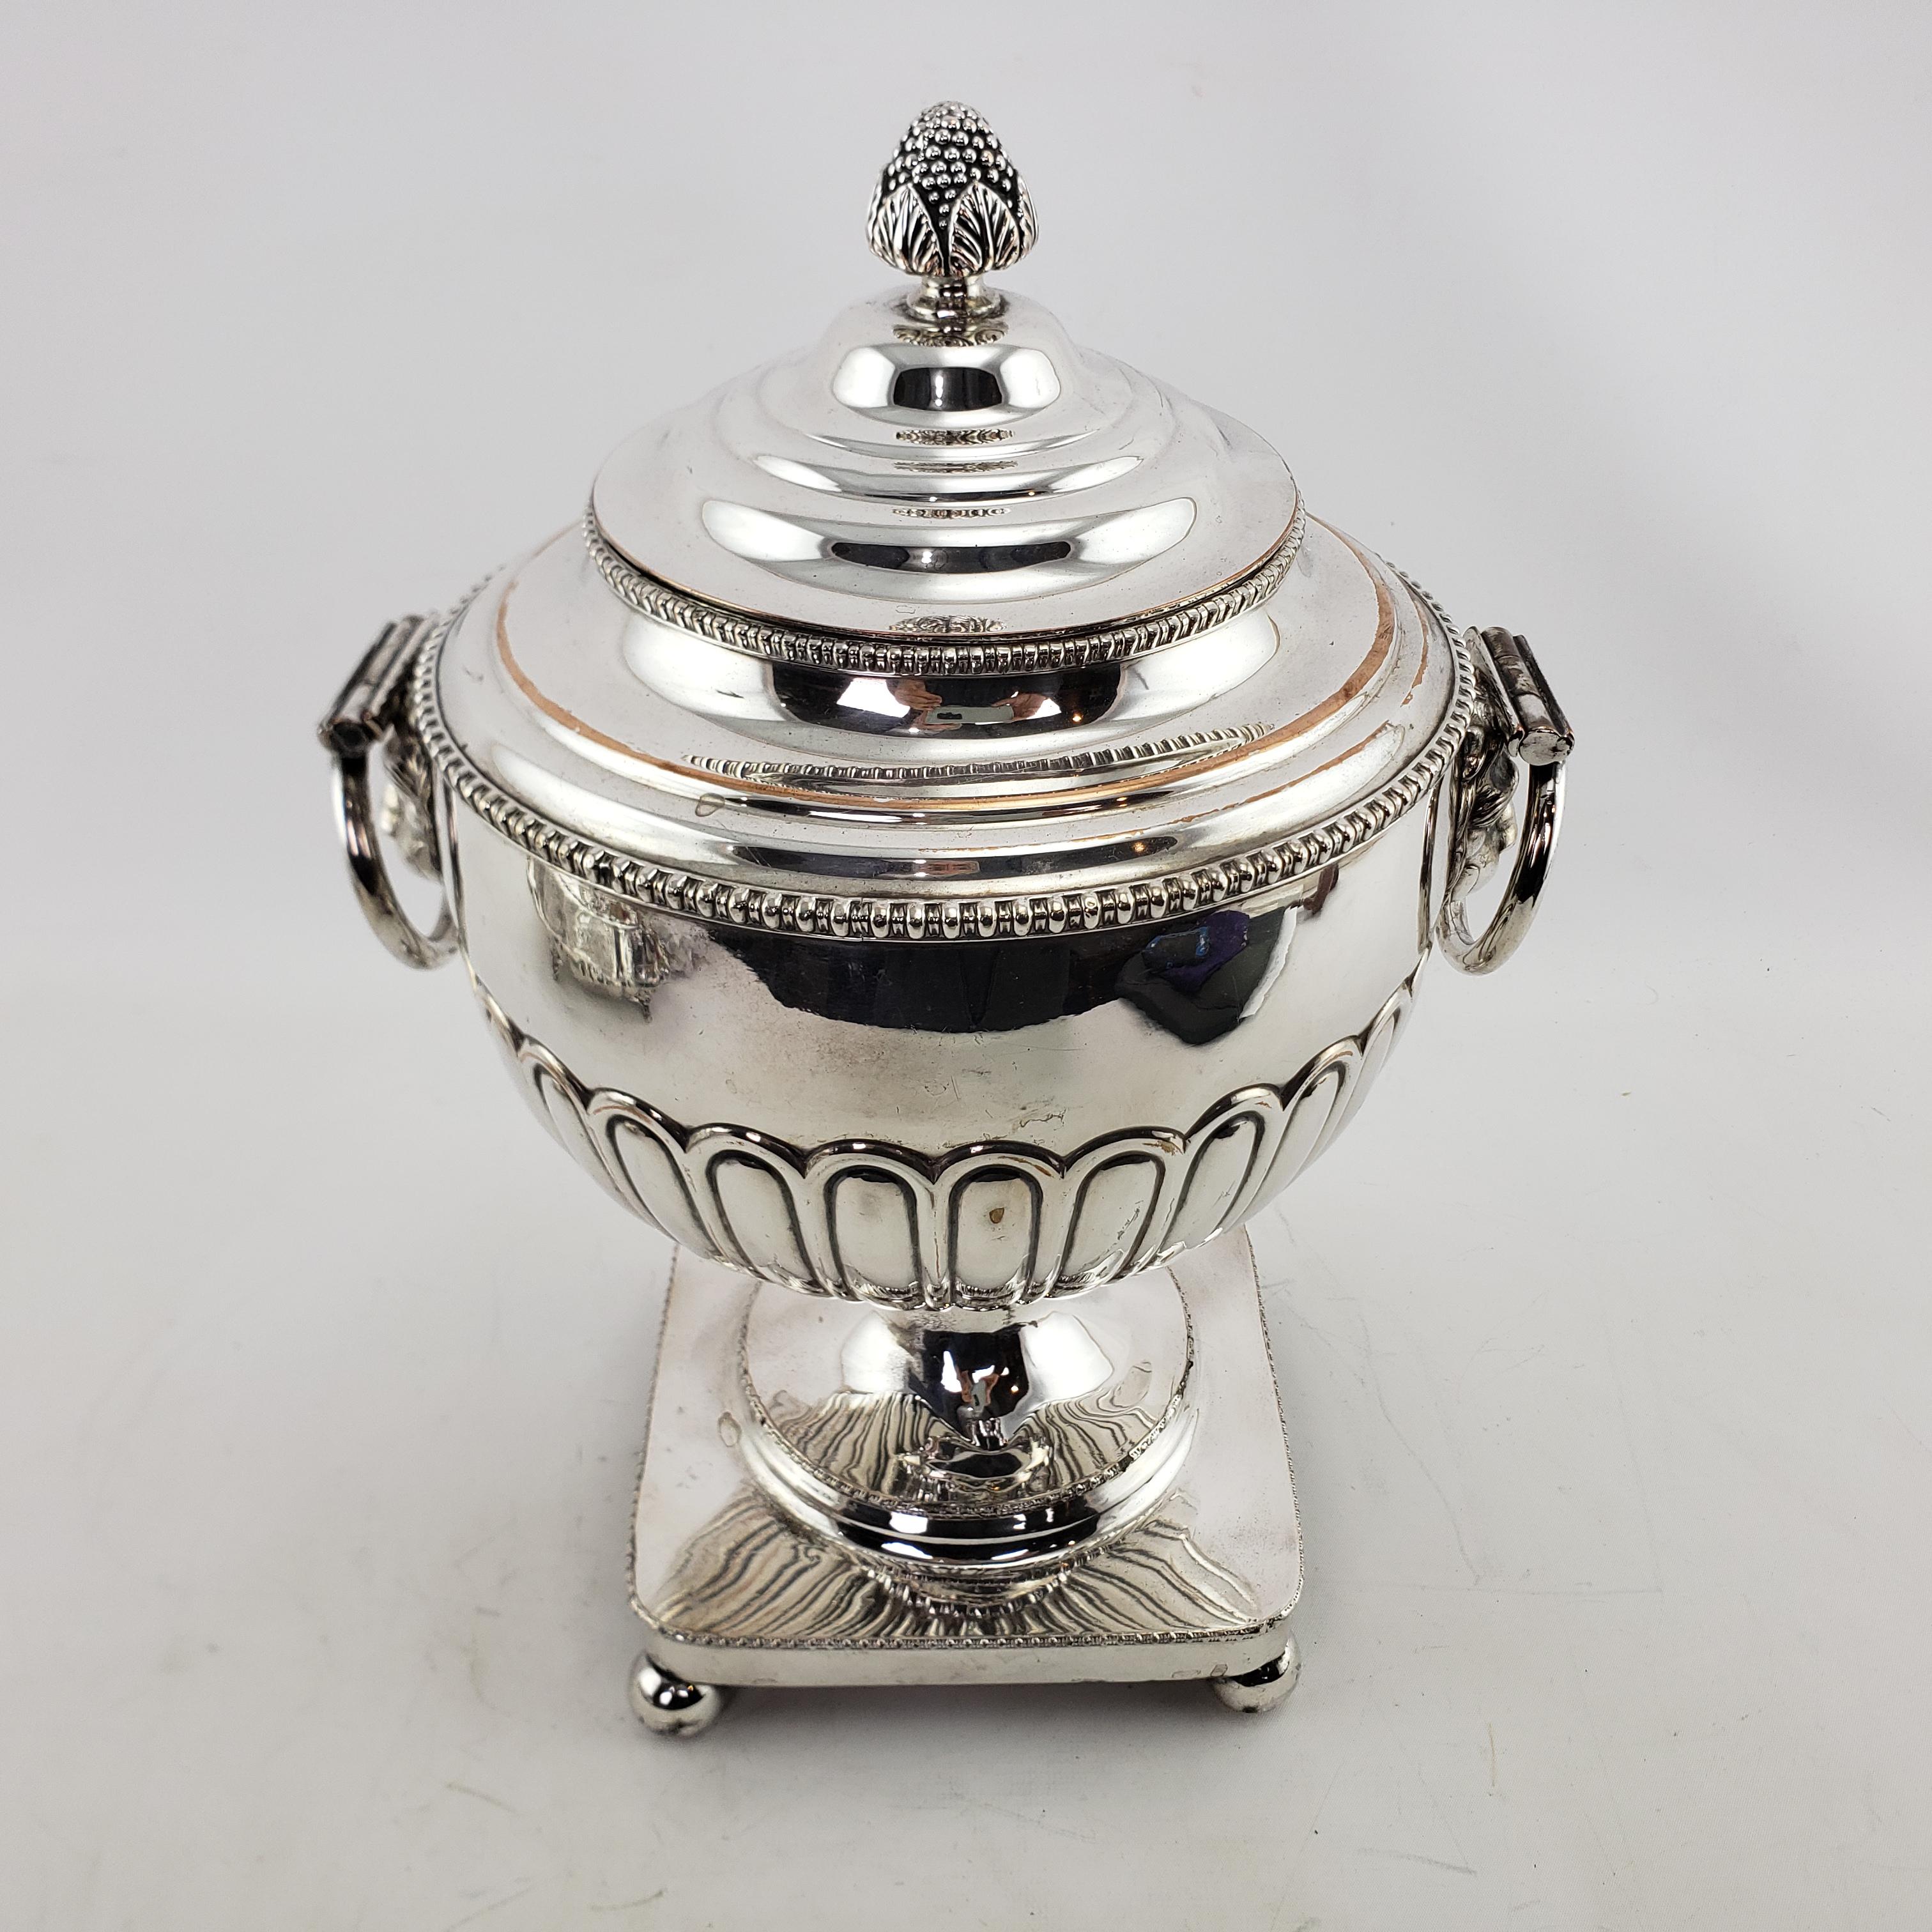 Antique Georgian Styled Silver Plated Tea or Hot Water Urn with Lion Mounts For Sale 2